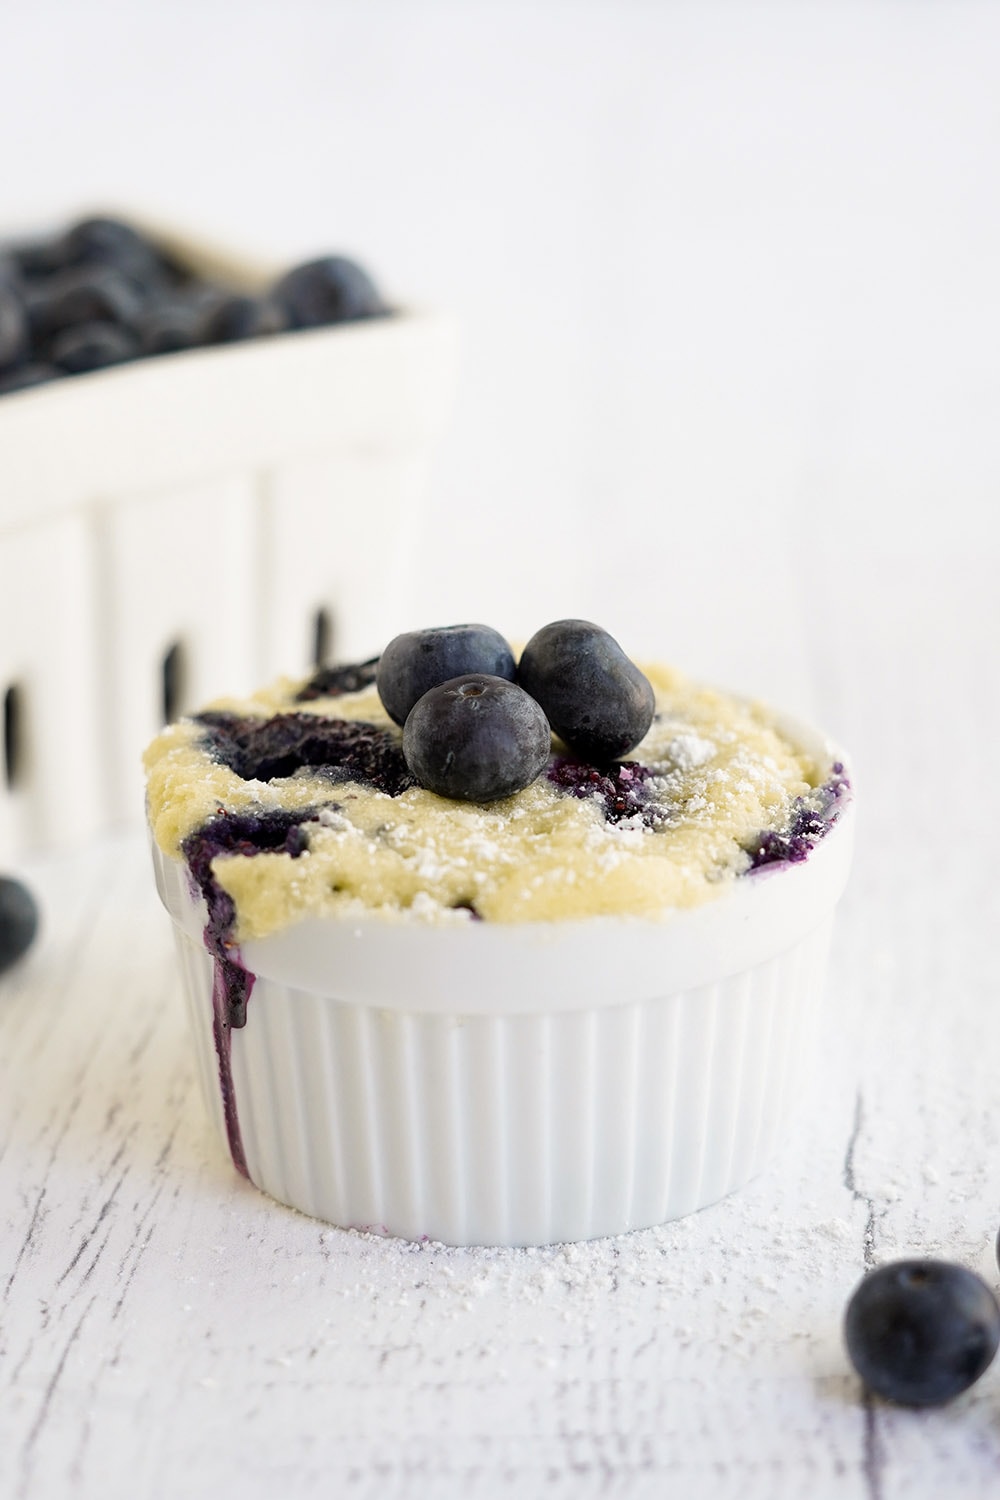 Blueberry cake in a mug with basket of berries on the table.